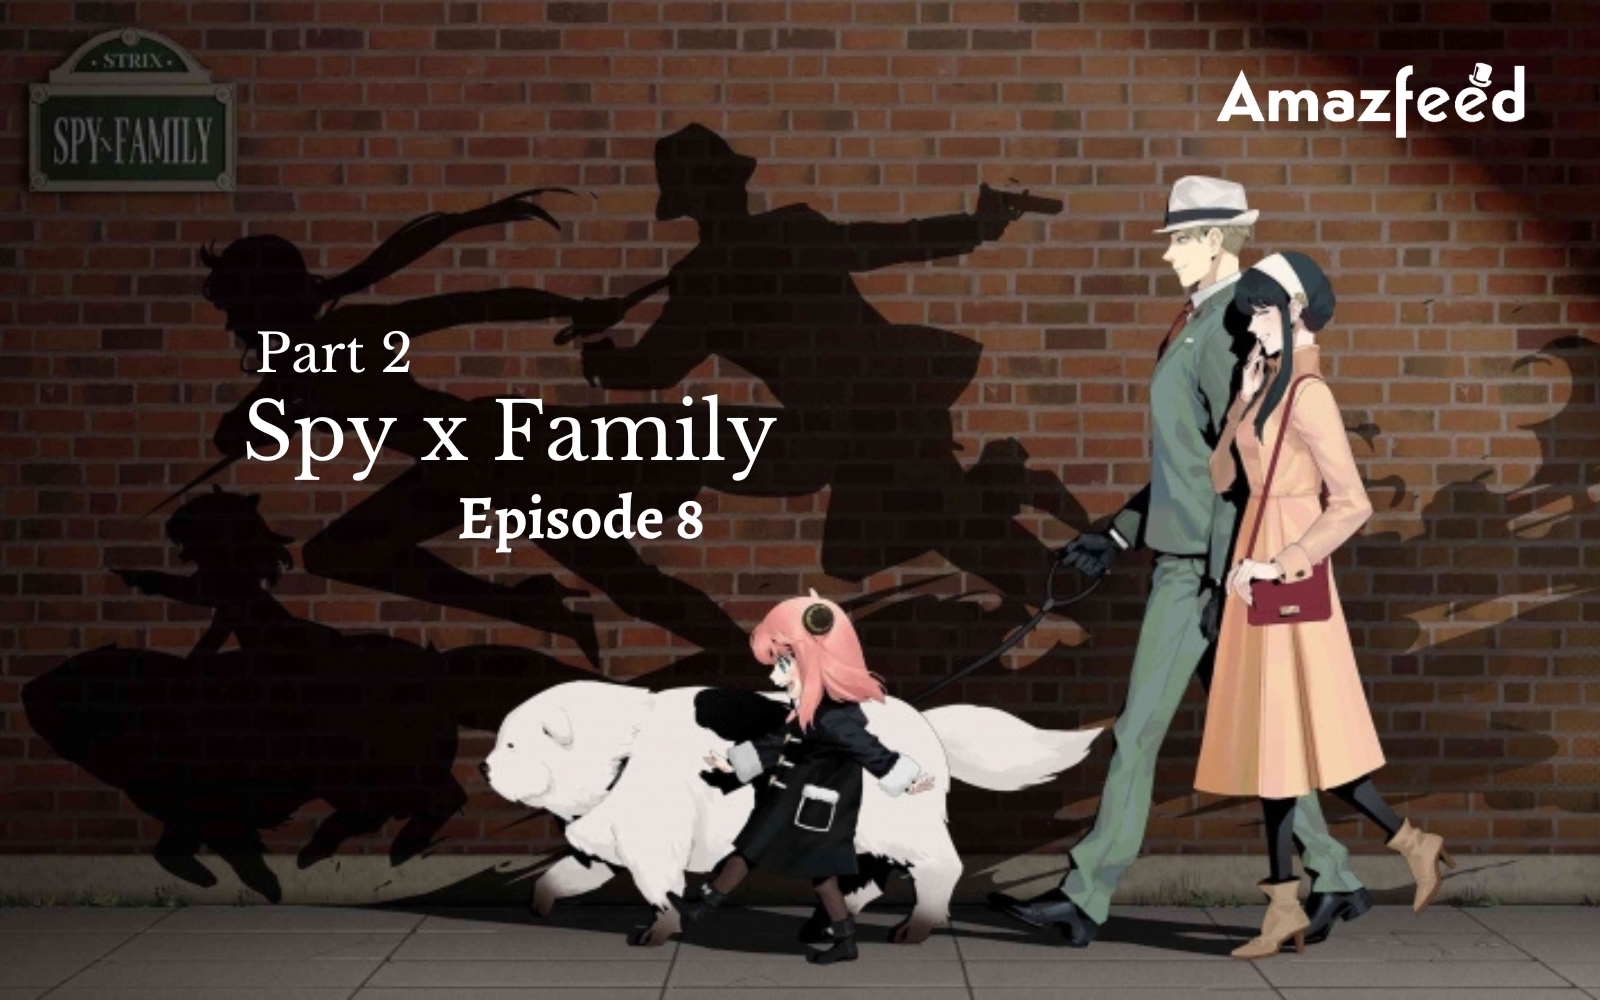 Spy x Family season 2 episode 8: Yor's resolve as an assassin outweighs her  life with Loid and Anya